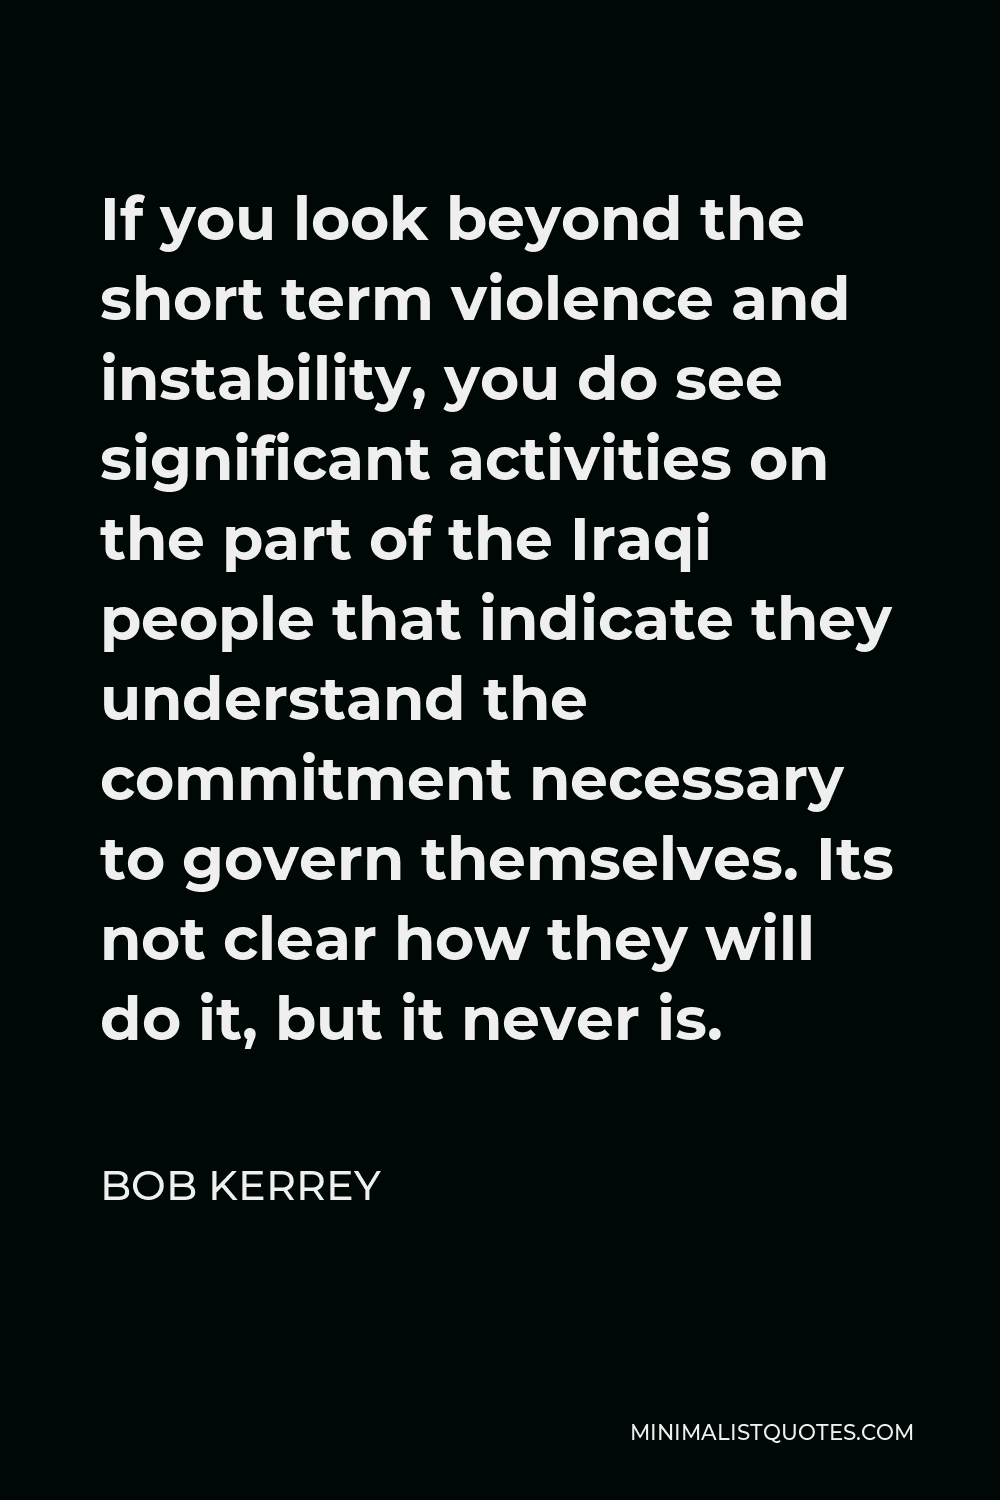 Bob Kerrey Quote - If you look beyond the short term violence and instability, you do see significant activities on the part of the Iraqi people that indicate they understand the commitment necessary to govern themselves. Its not clear how they will do it, but it never is.